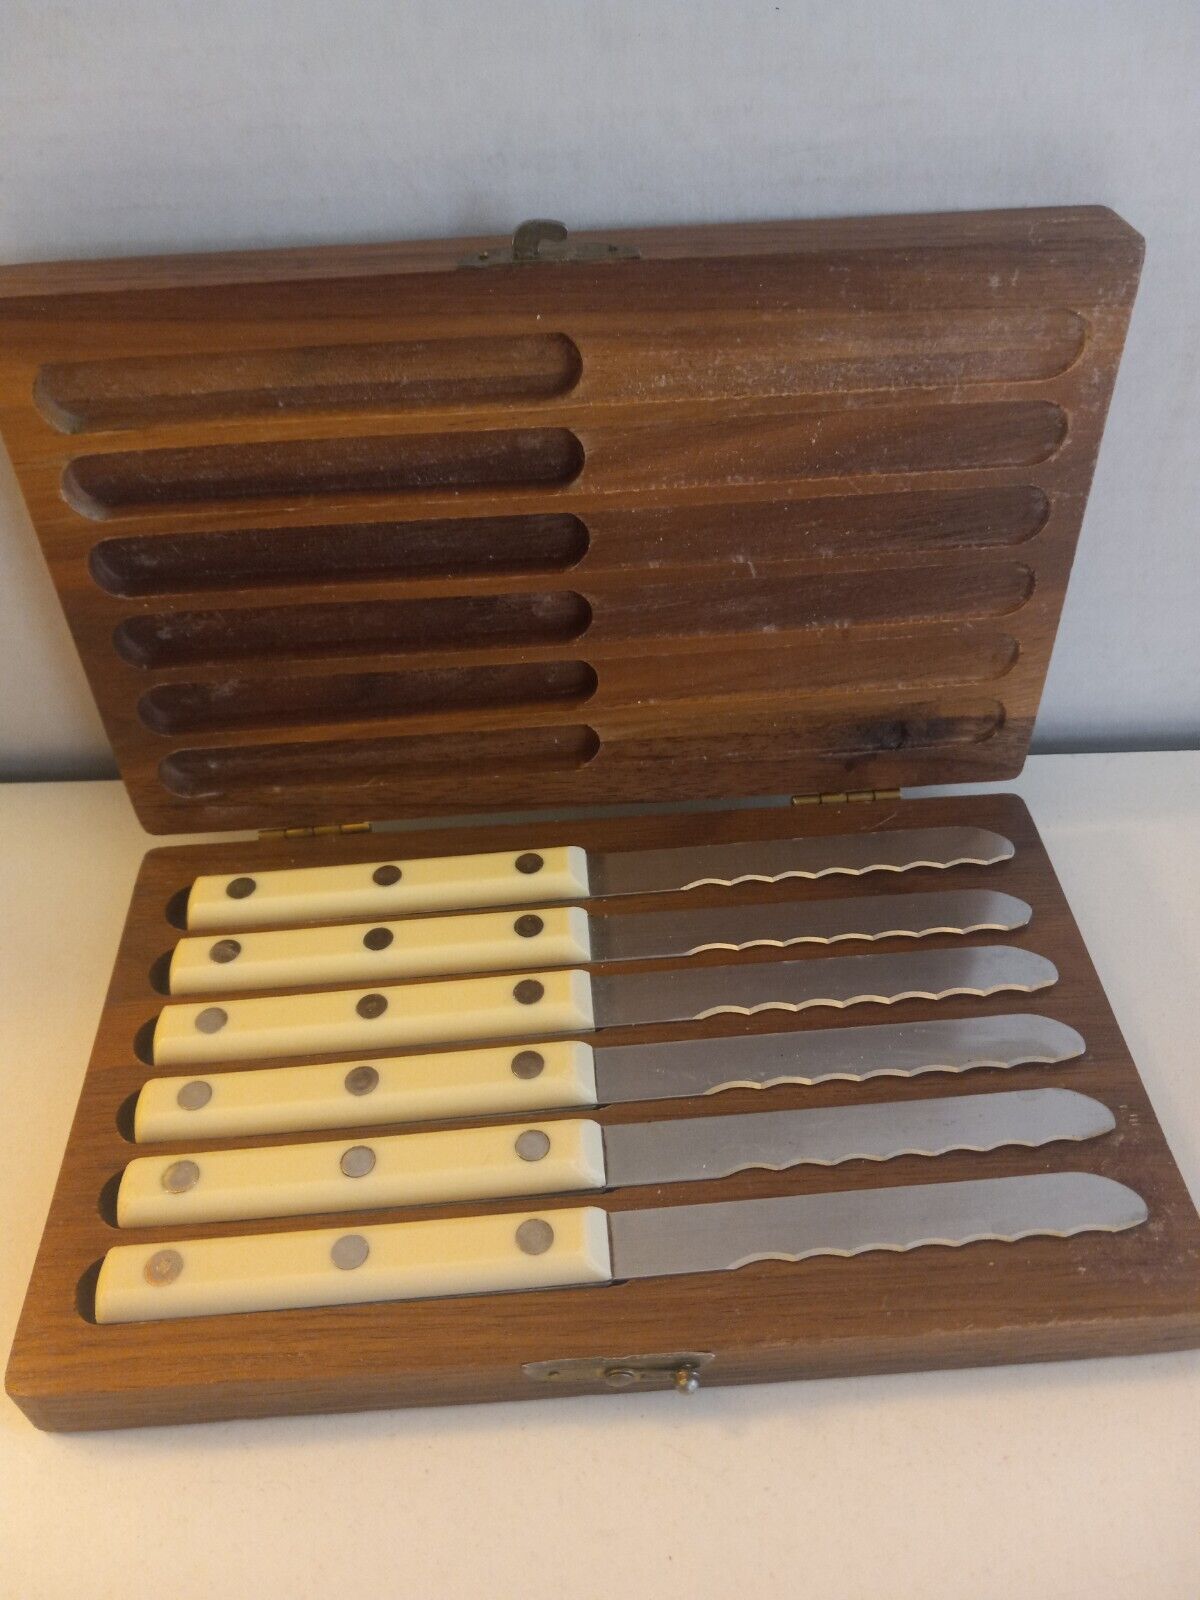 Vintage Simmons Stainless Steak Knives 6 pc Set w/ Wood Box